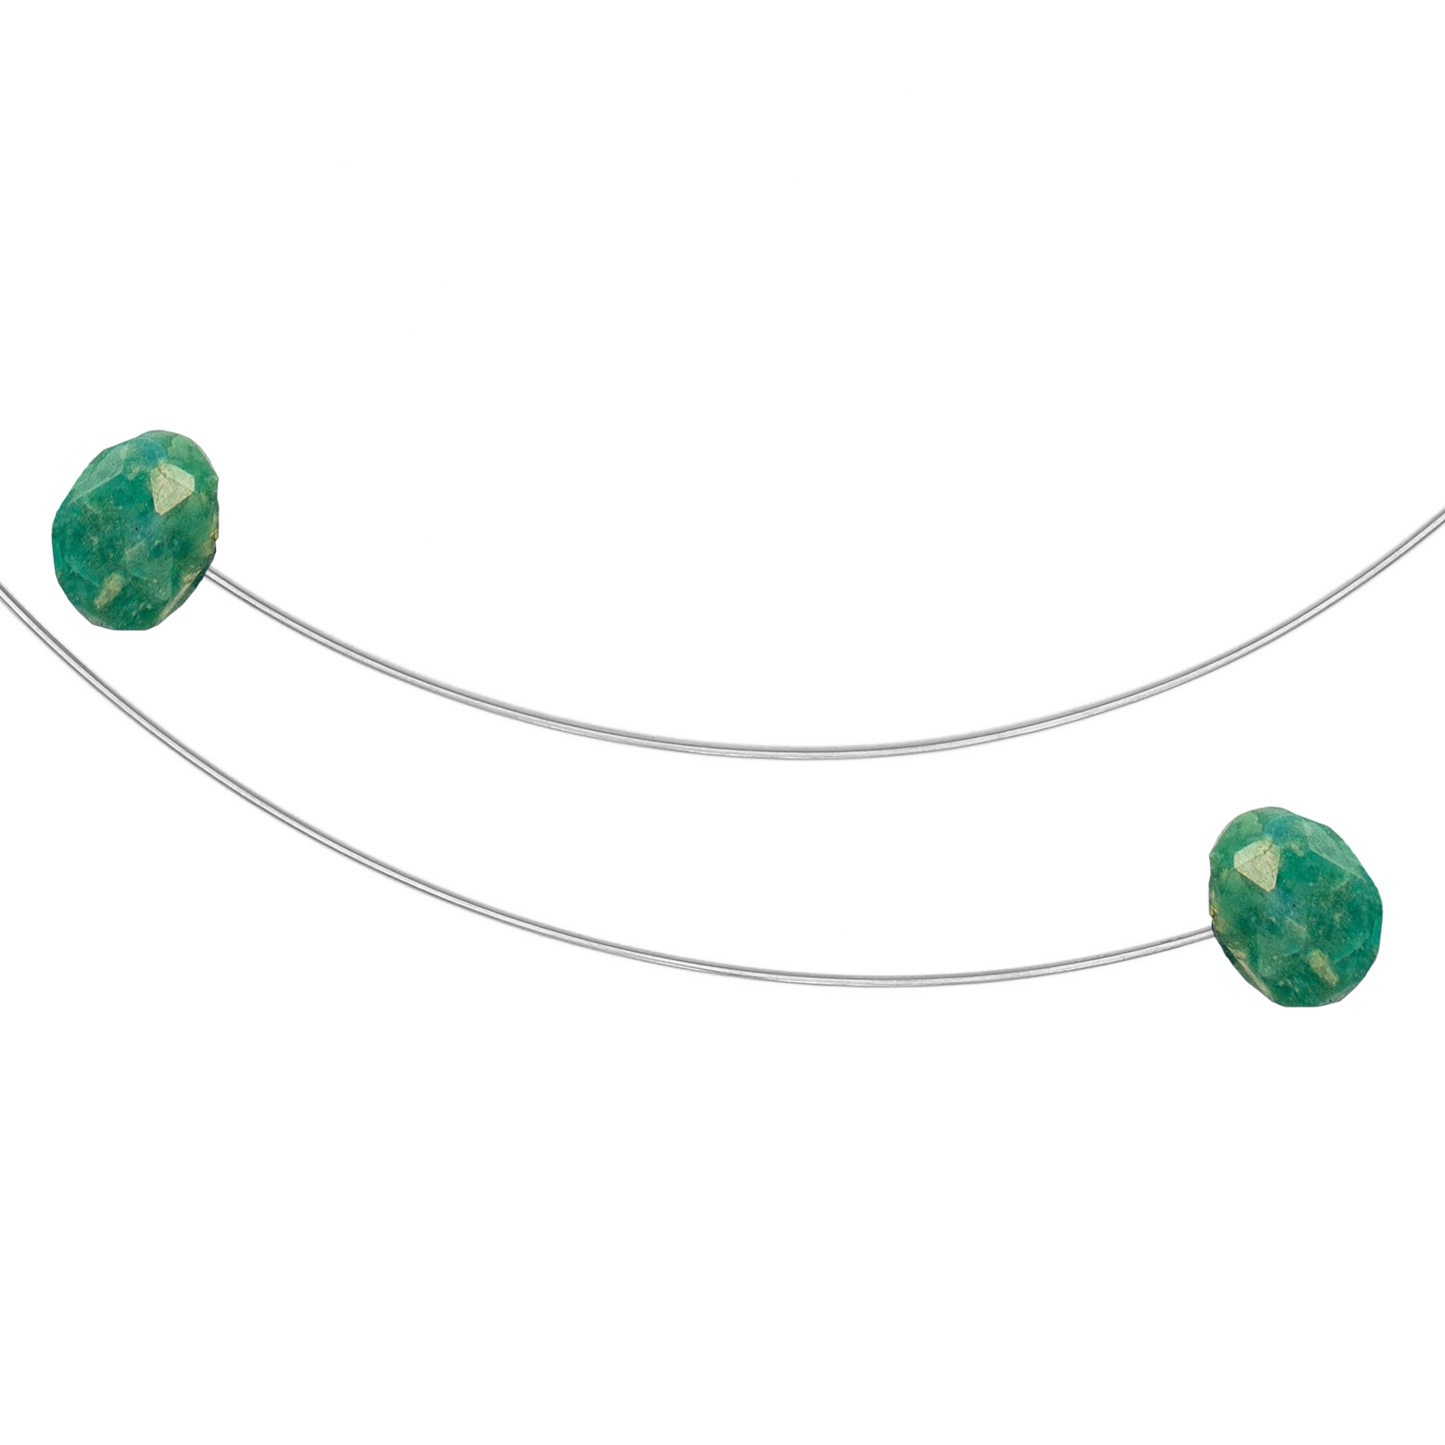 Asymmetric Neckwires with hand-cut gemstones